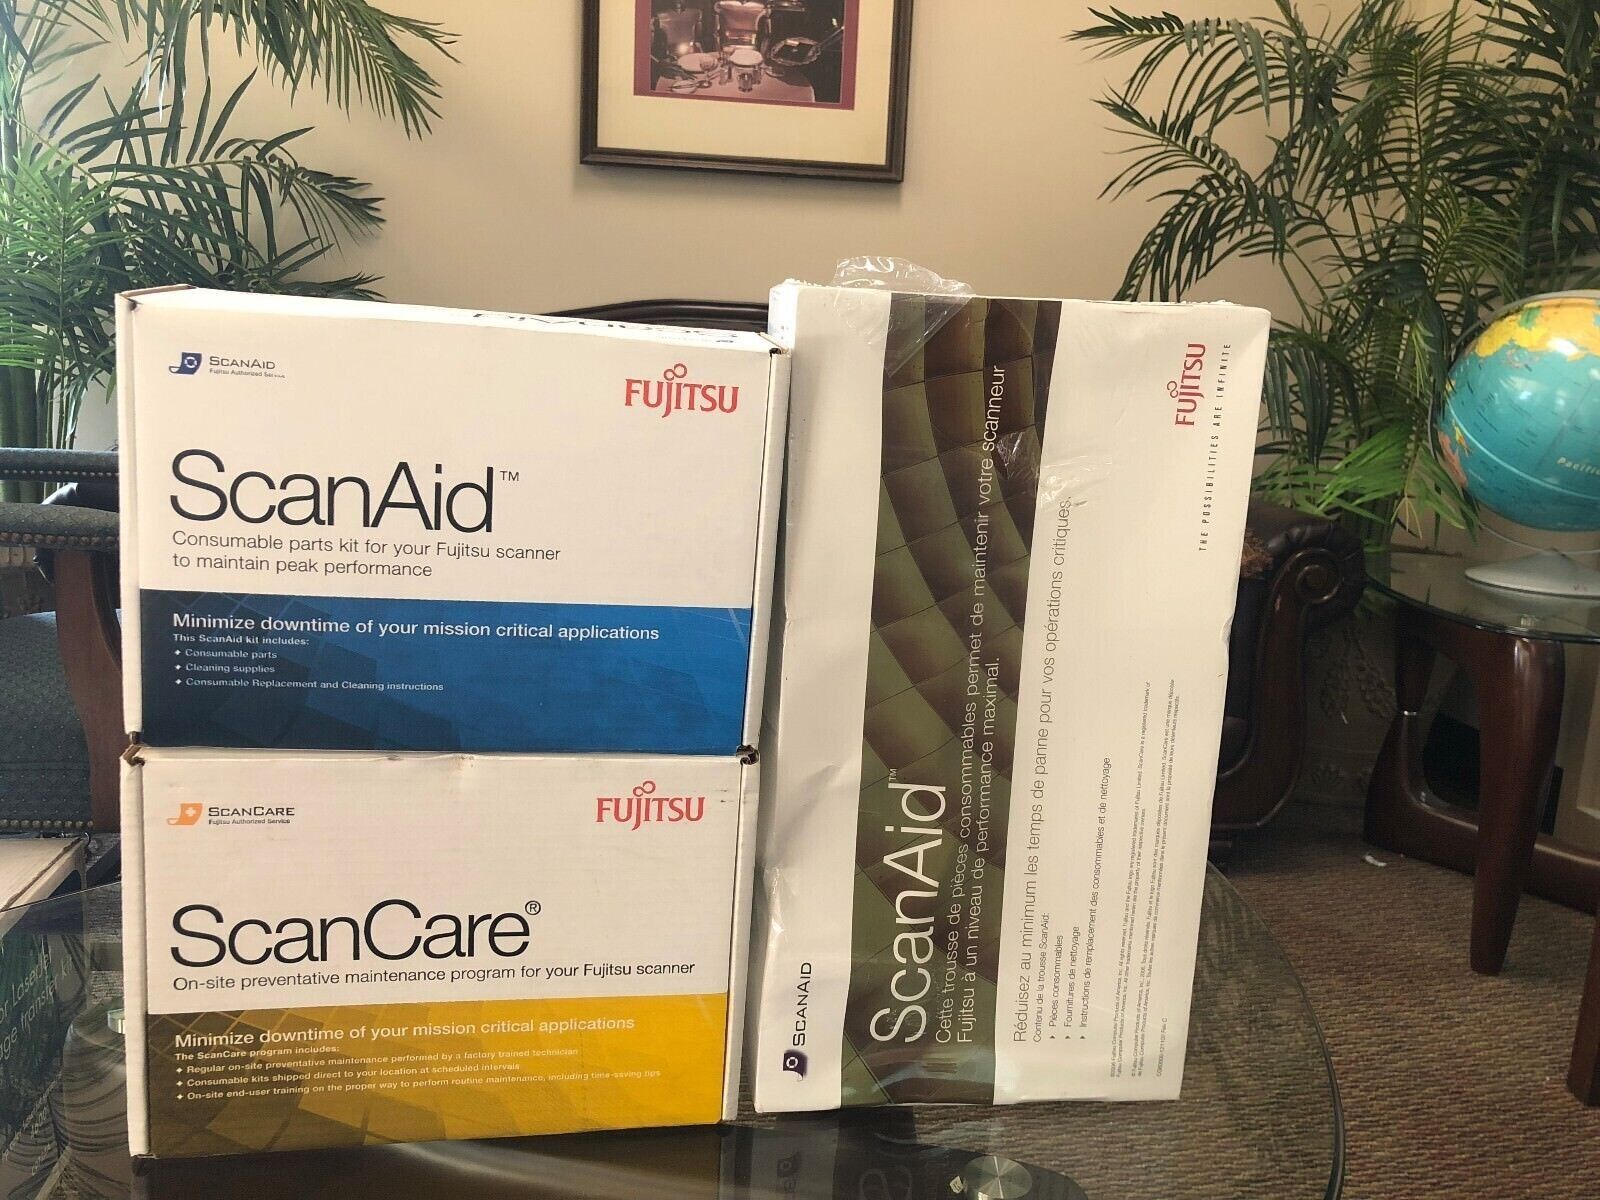 1 GENUINE FUJITSU SCANAID CLEANING & CONSUMABLE KIT FOR FI-6800 / CG01000-530801